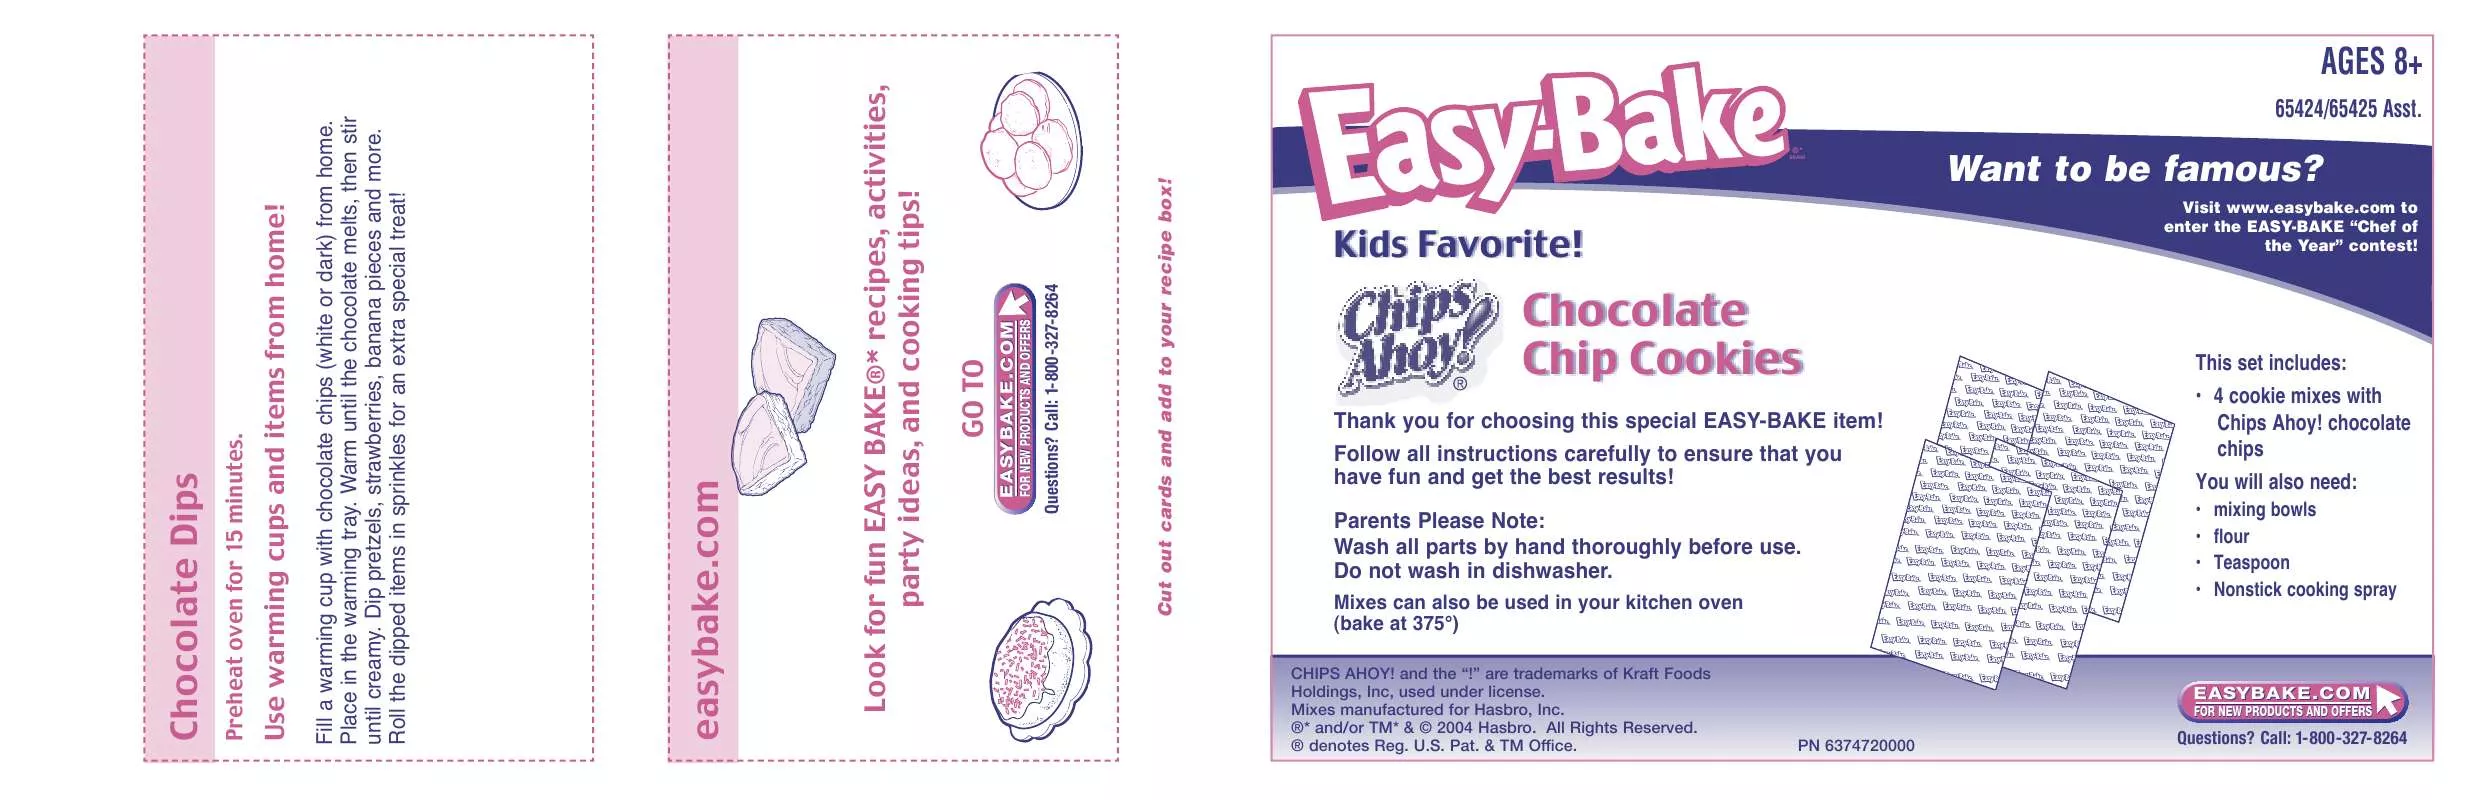 Mode d'emploi HASBRO EASY BAKE CHIPS AHOY CHOCOLATE CHIP COOKIES 2004